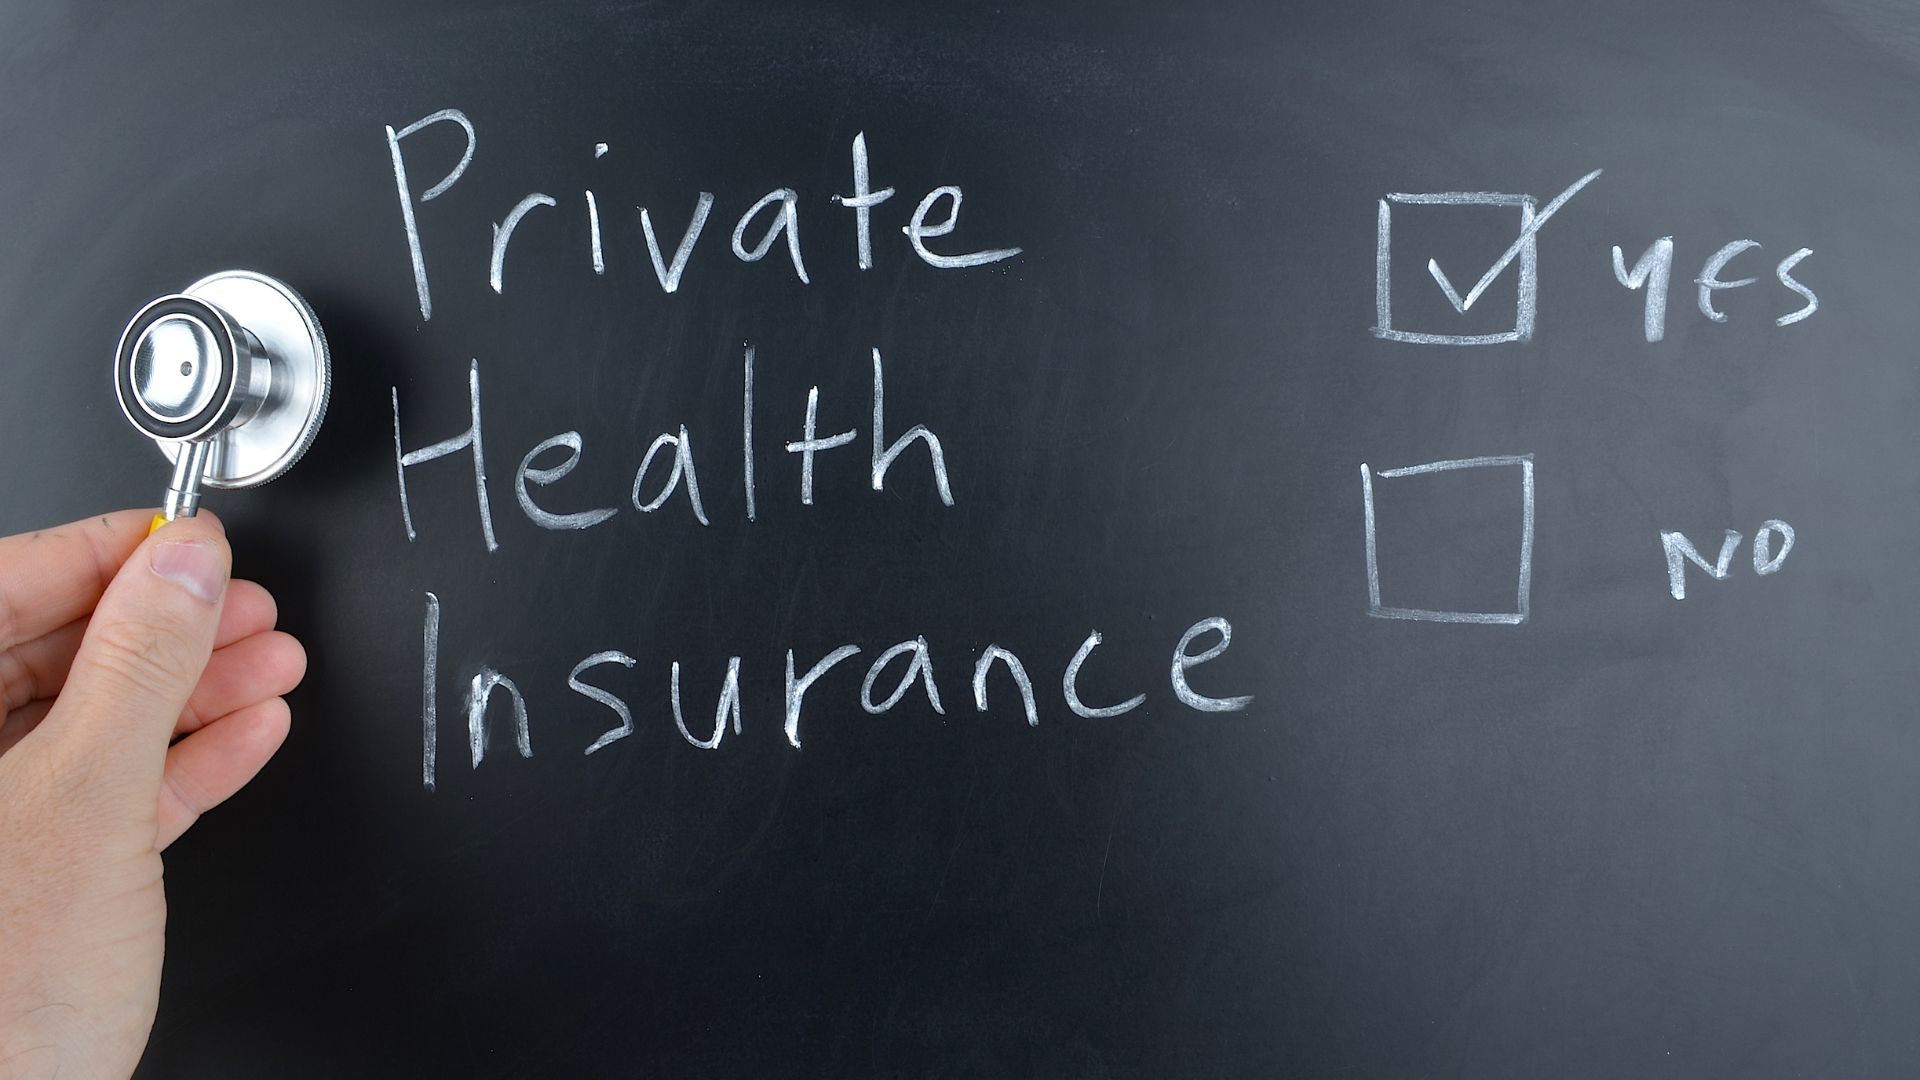 Private health insurance. Is it worth it?